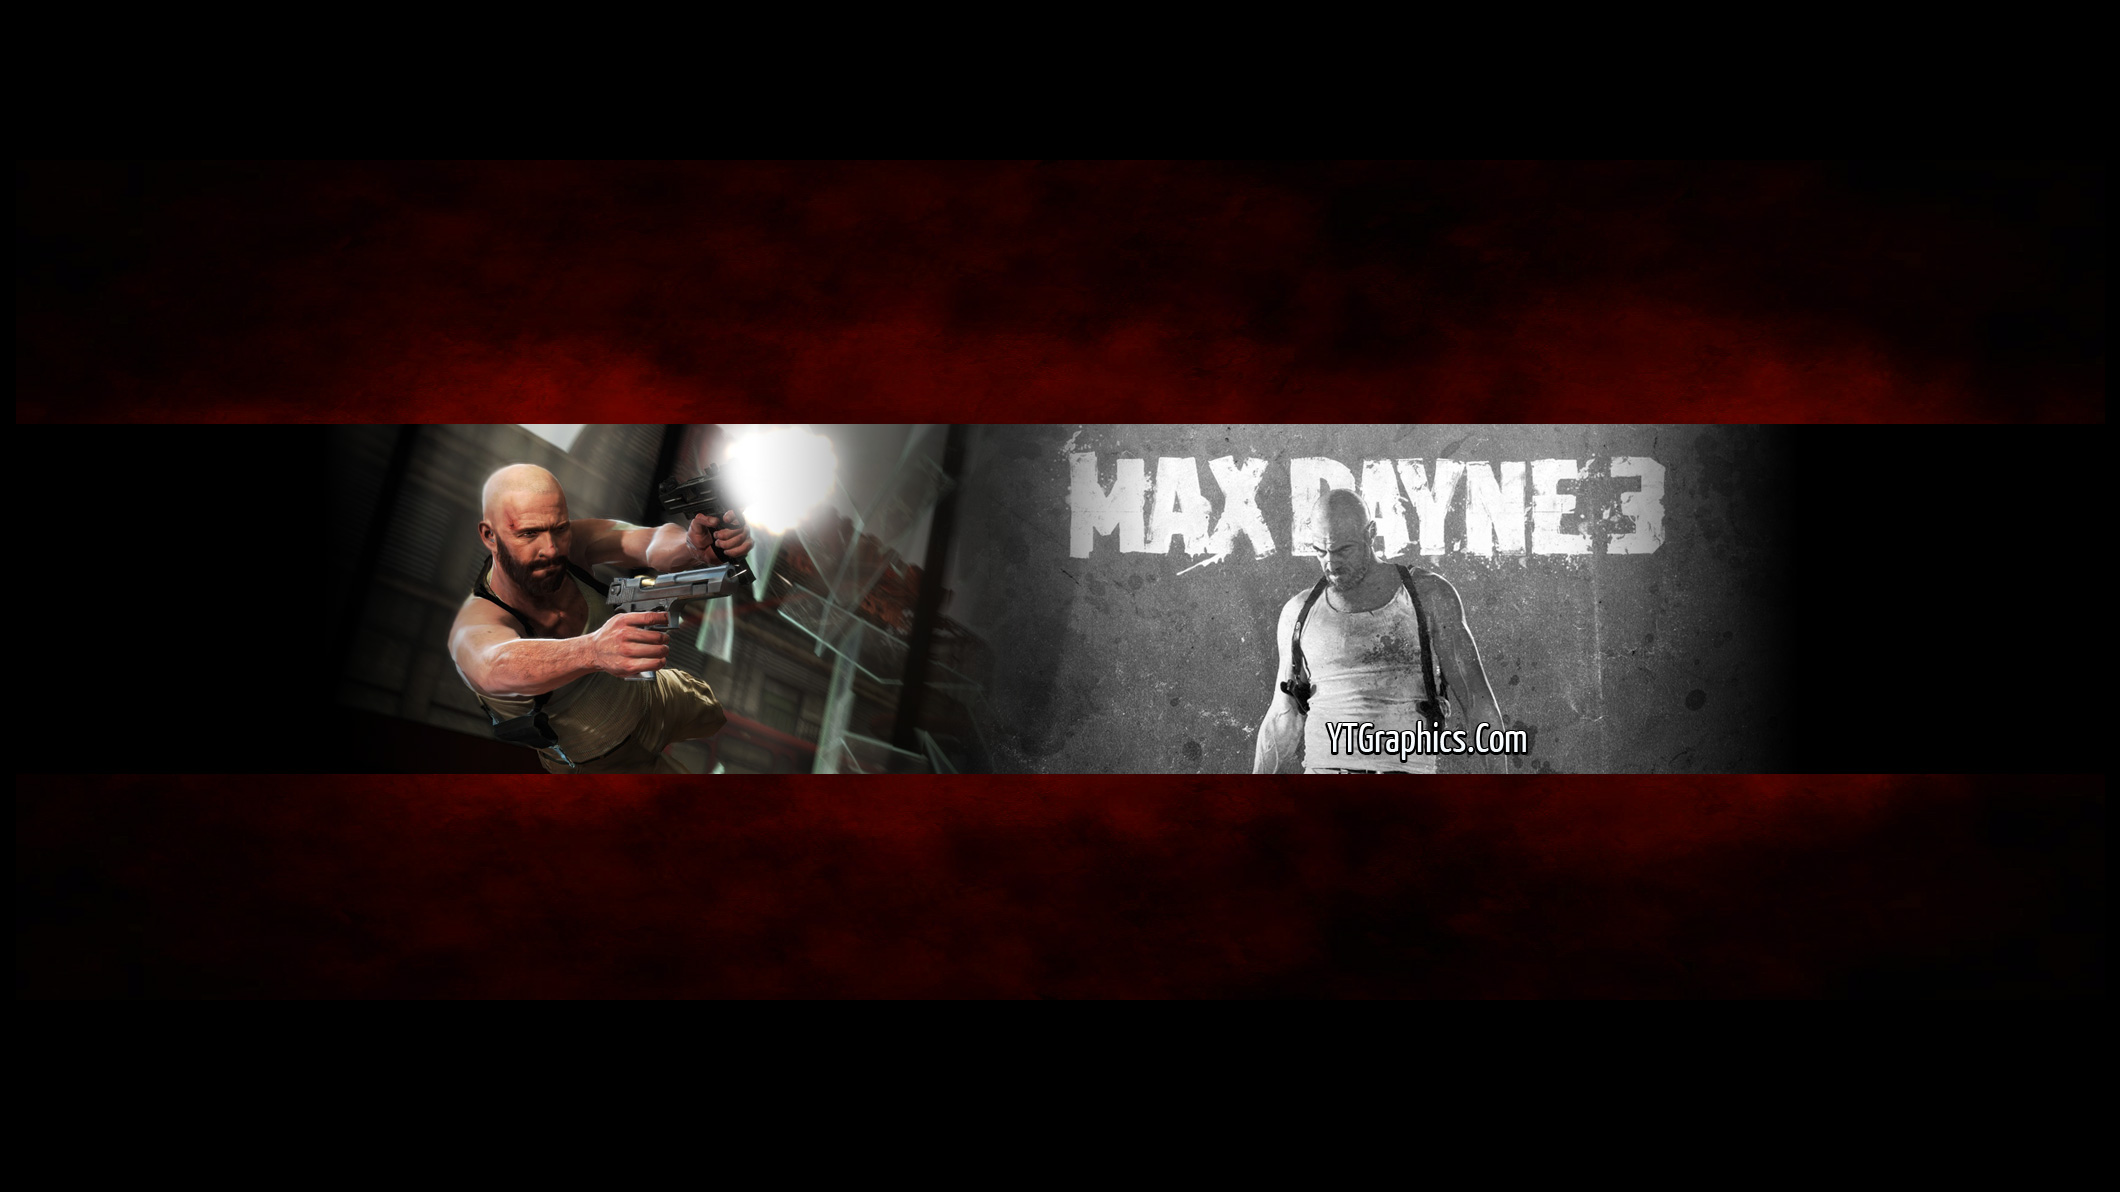 Max Payne 3 Youtube Channel Art Banner